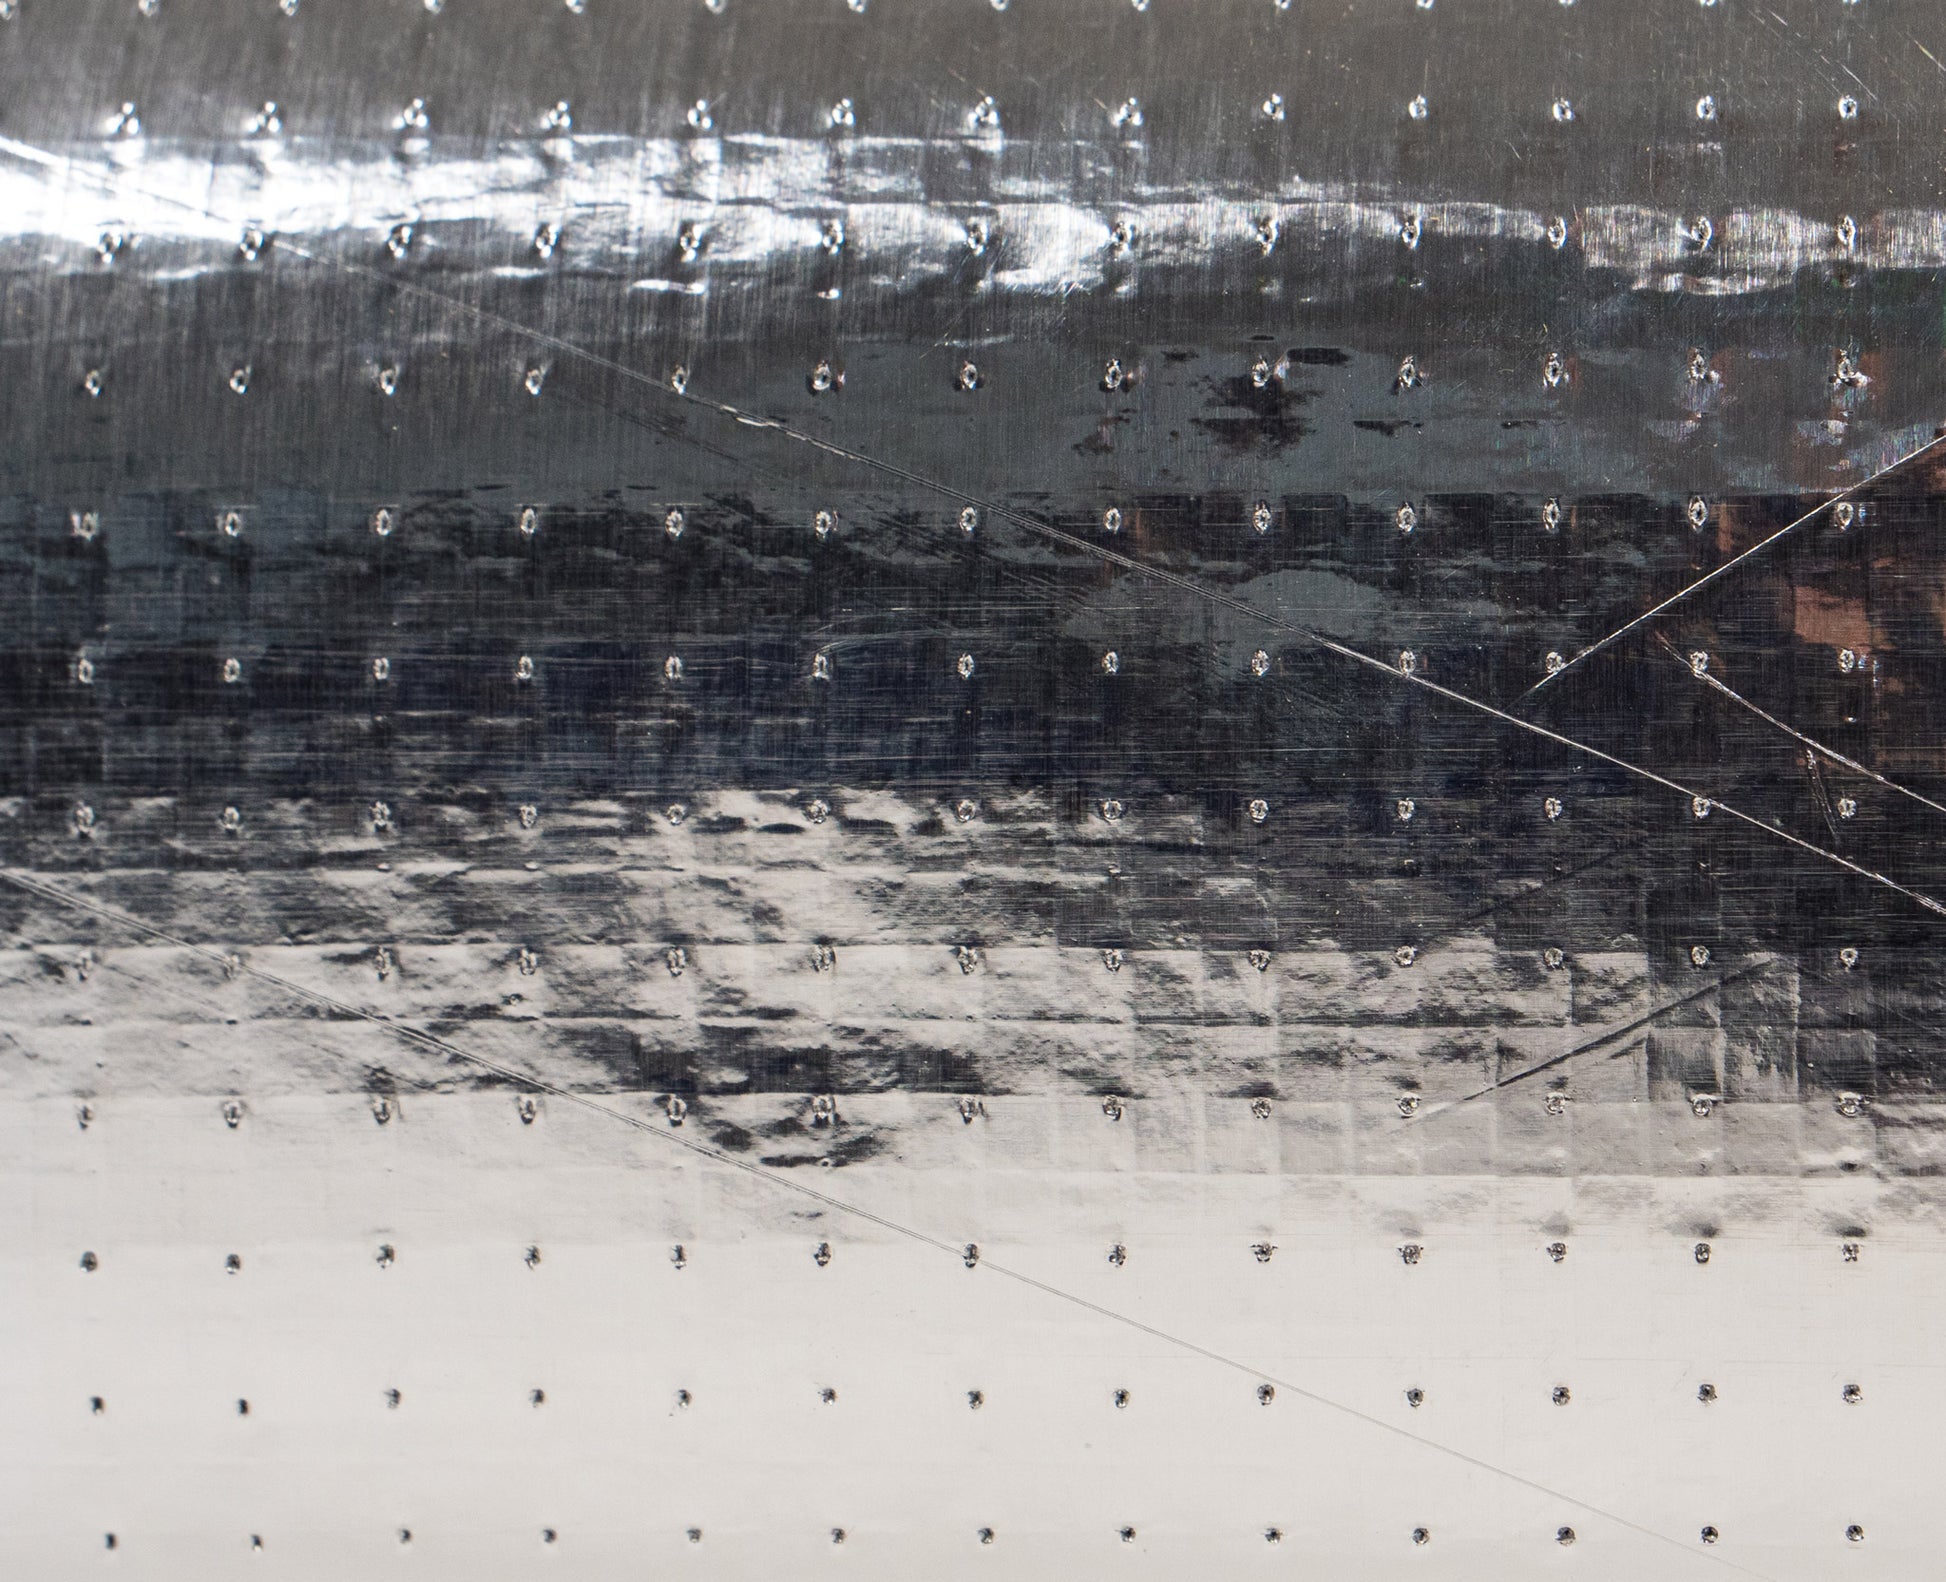 Tiny perforations promote air flow in a SCIF room